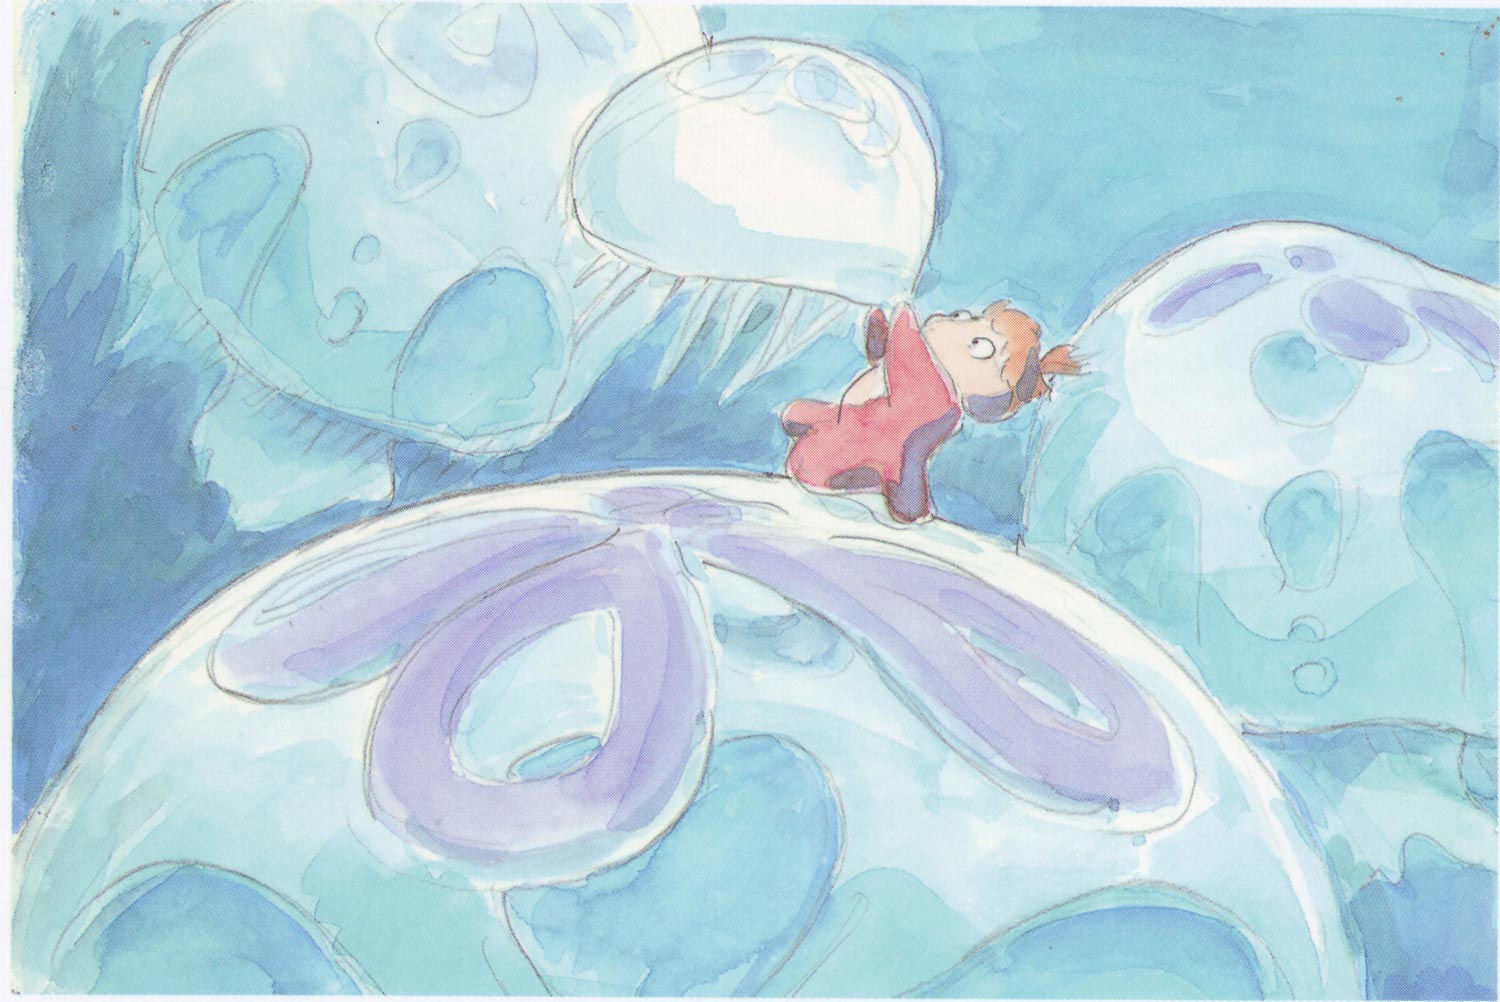 ponyo_on_the_cliff_by_the_sea_artwork_character 14.jpg.